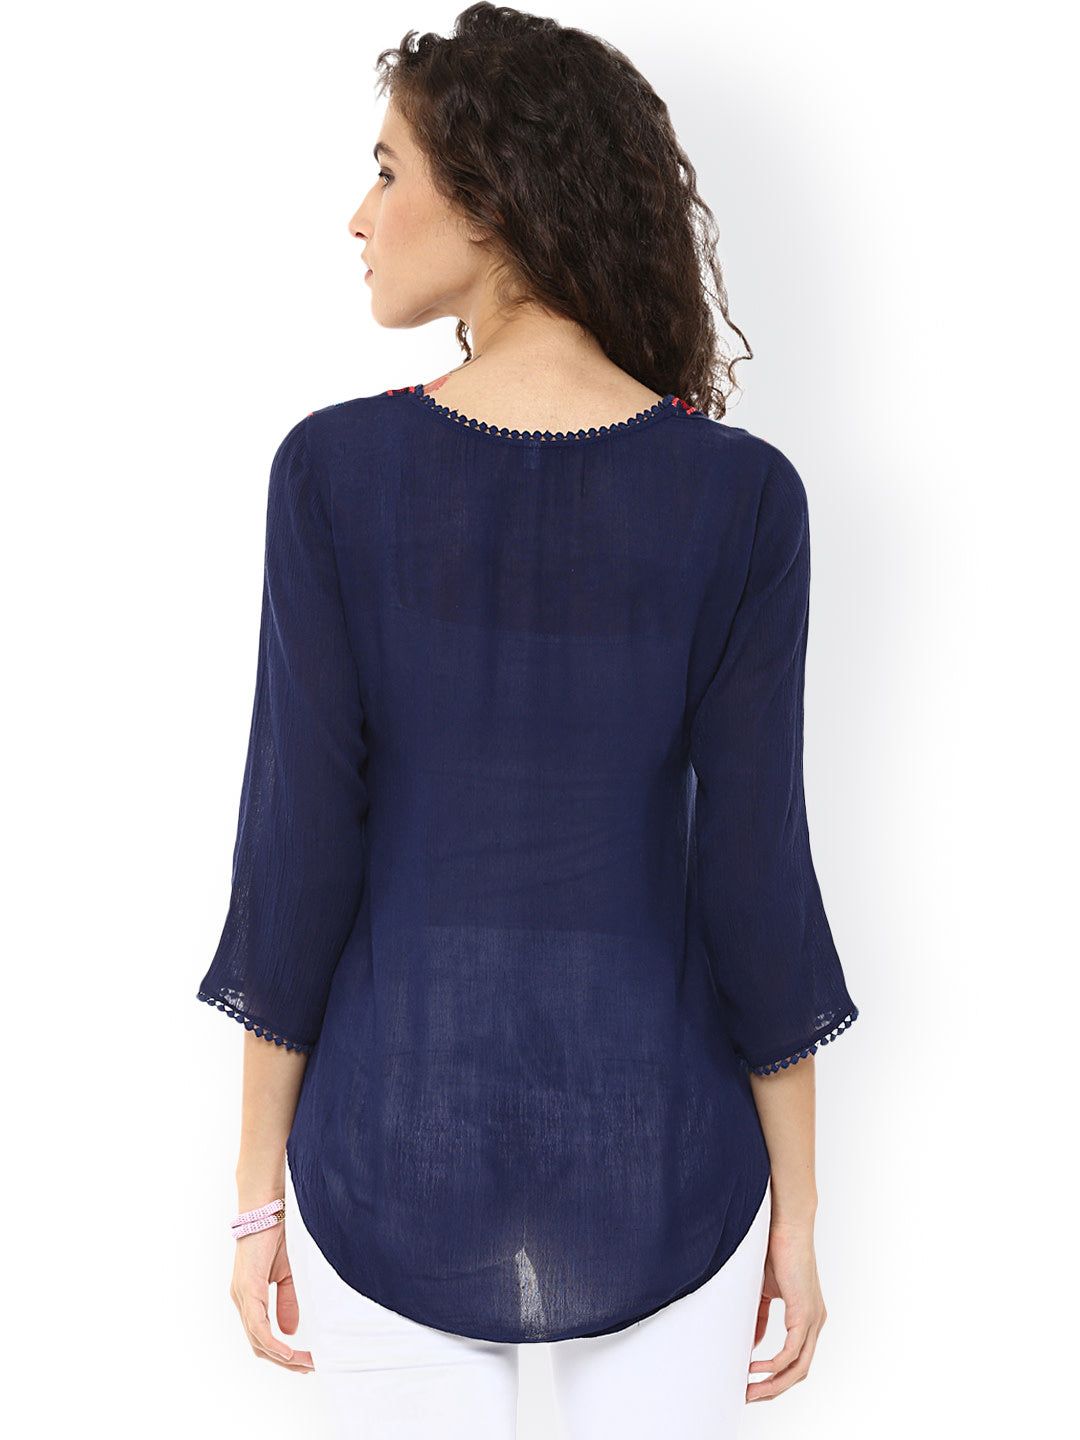 Bhama Couture Navy Top